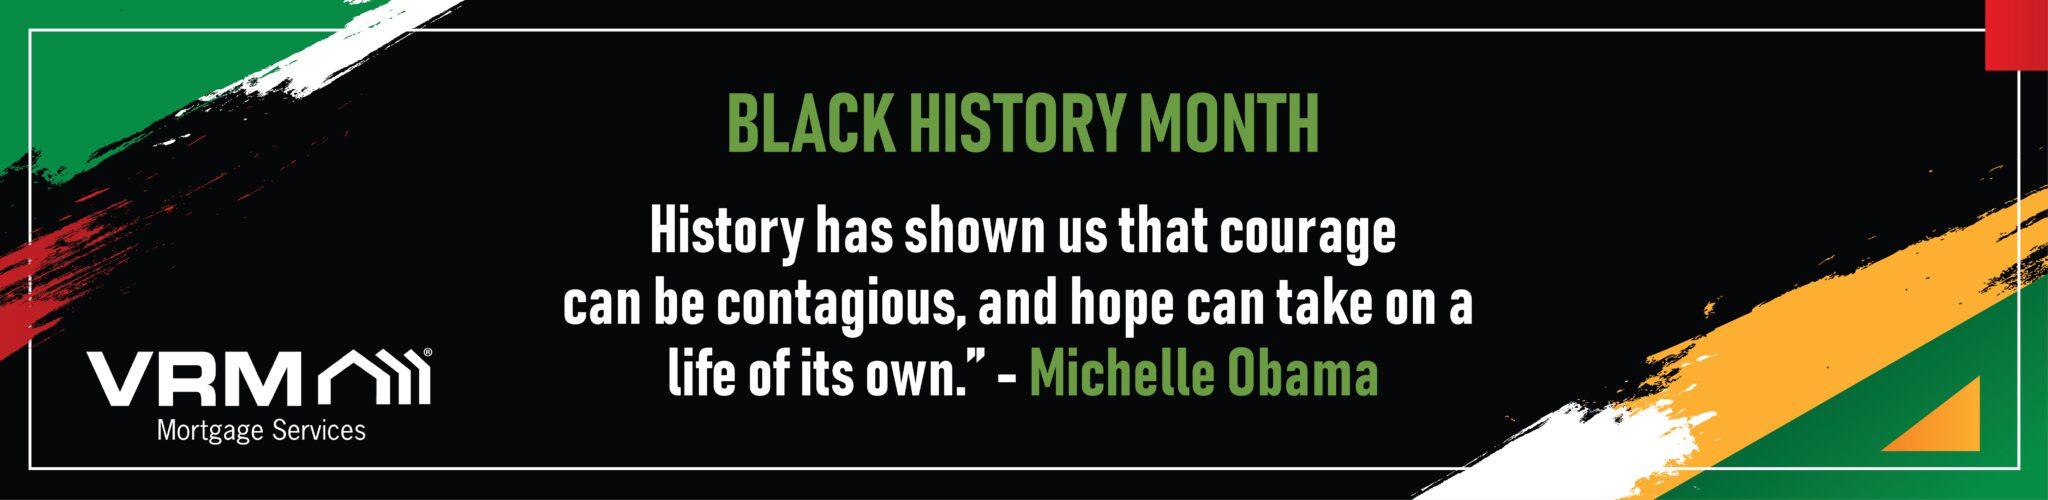 Black history month quote from Michelle Obama | REO Asset Management | VRM Mortgage Services